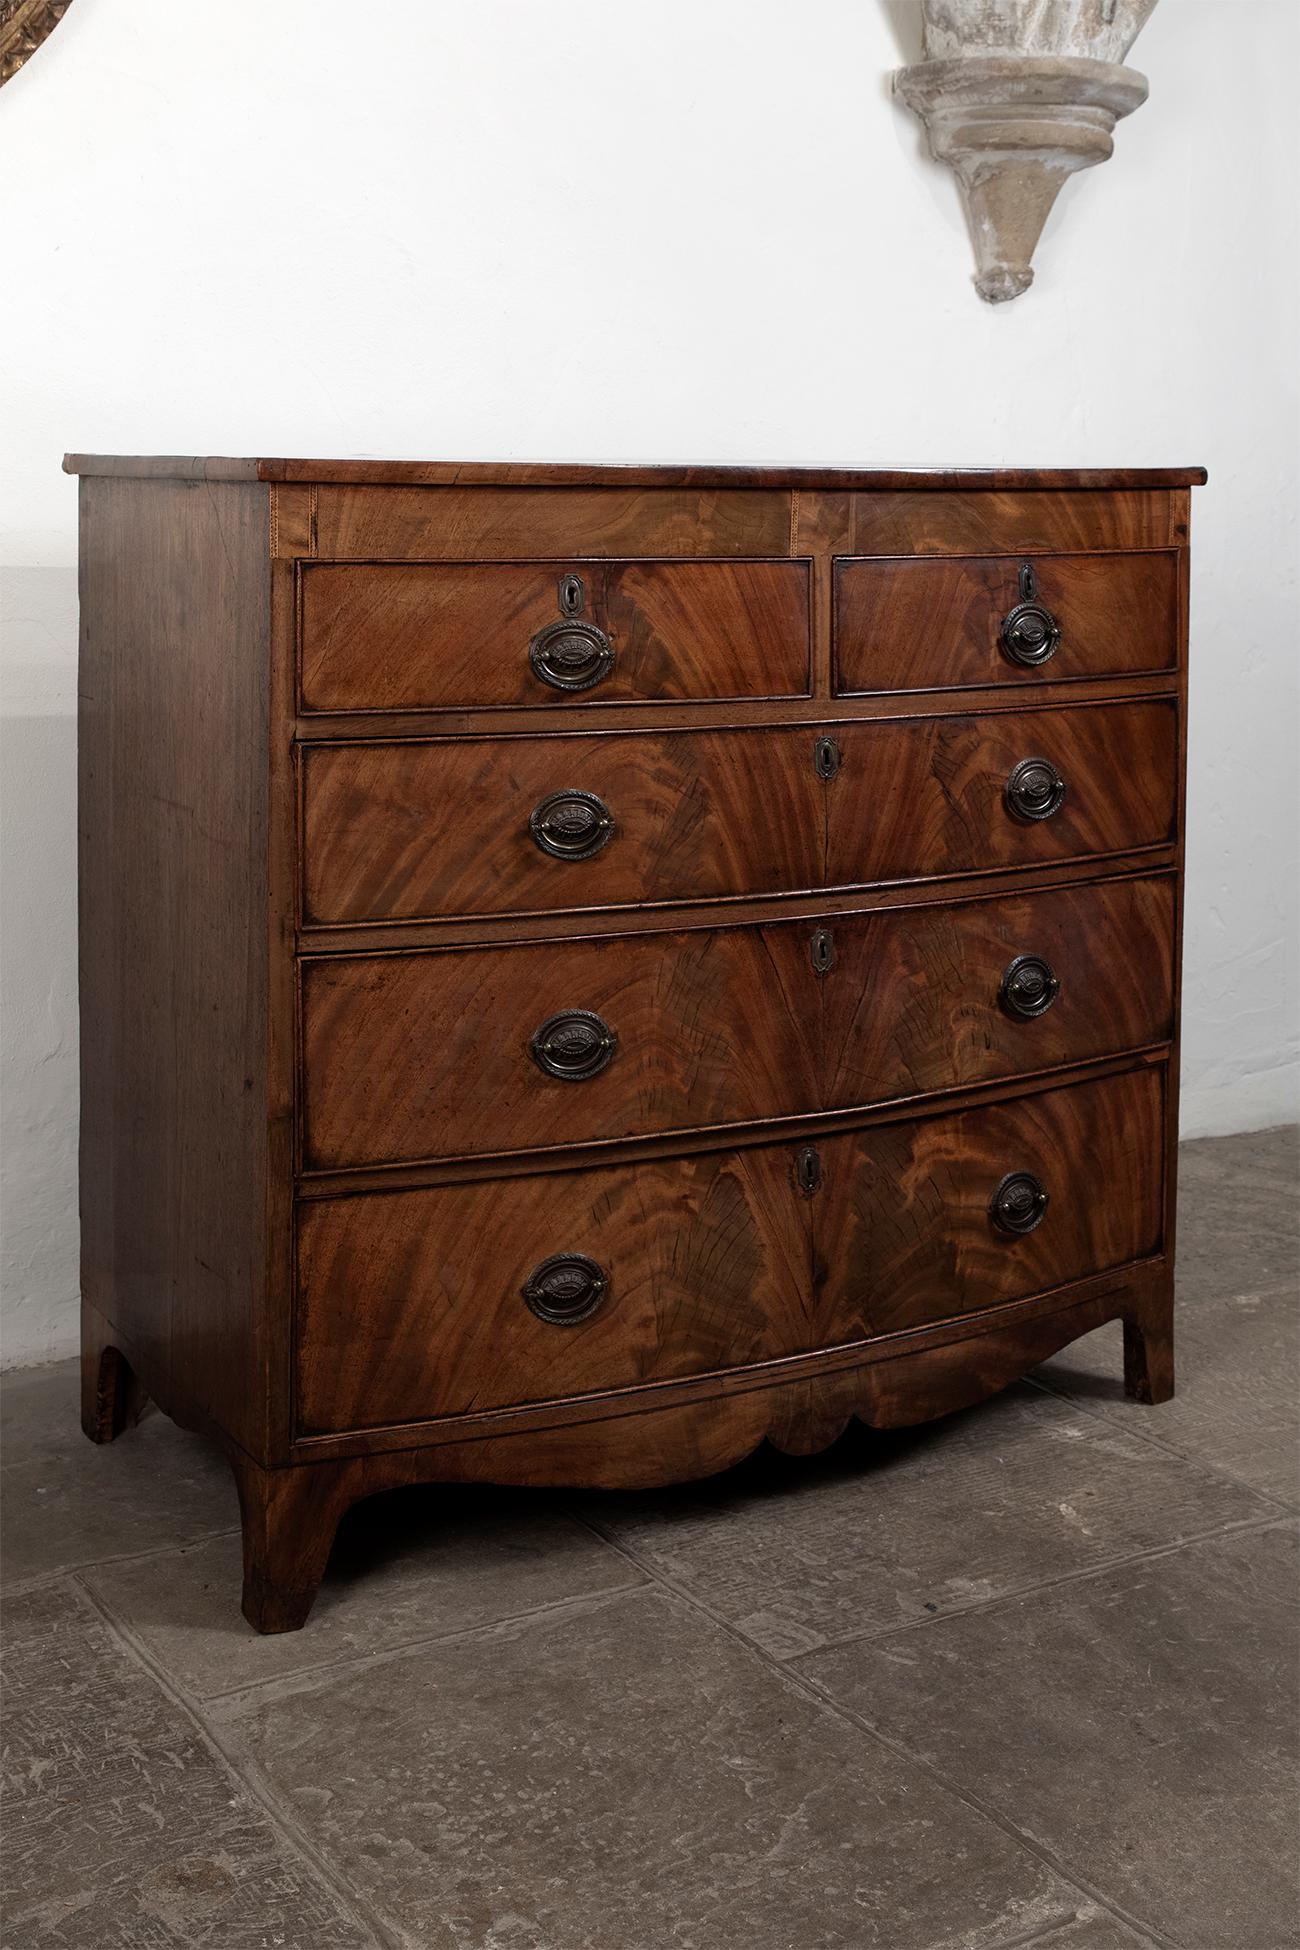 A rather handsome George III flame mahogany bow fronted chest with two short over three long drawers. Crossbanded top with detailed ebony stringing on feet. Fitted with original decorative brass handles. Overall condition is excellent, small area of